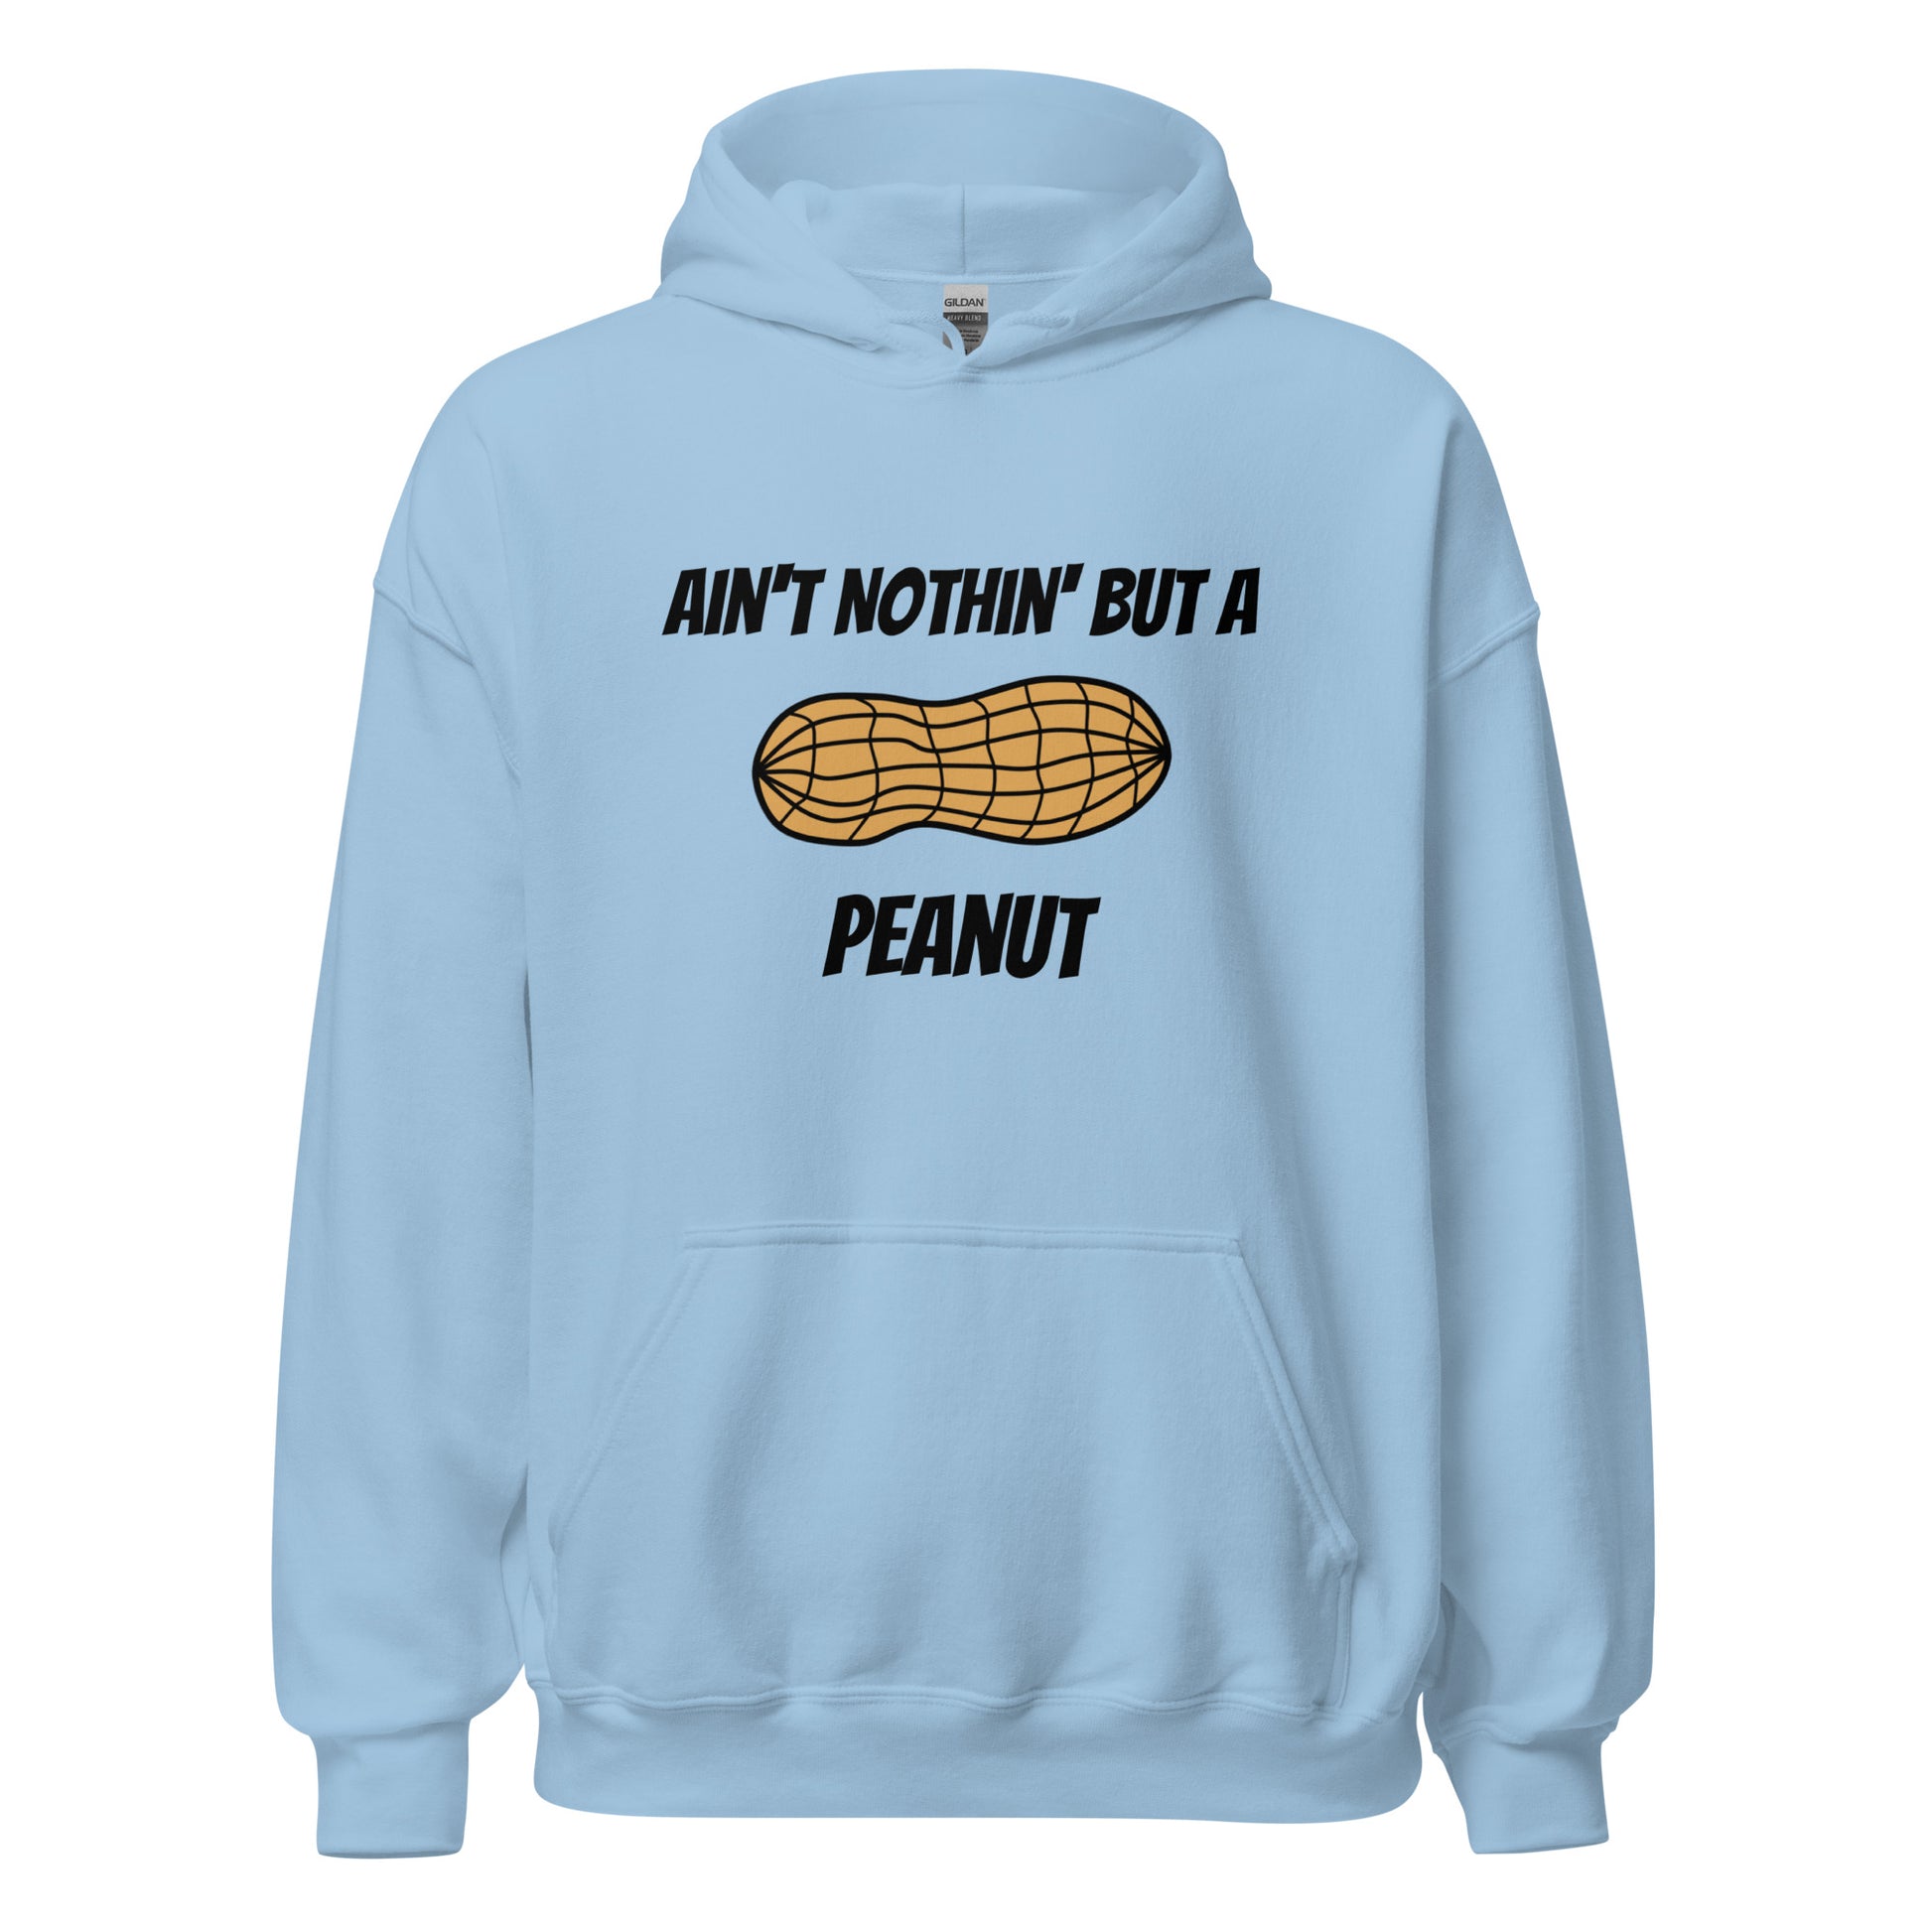 Ain't Nothin' but a Peanut Hoodie in Light Blue